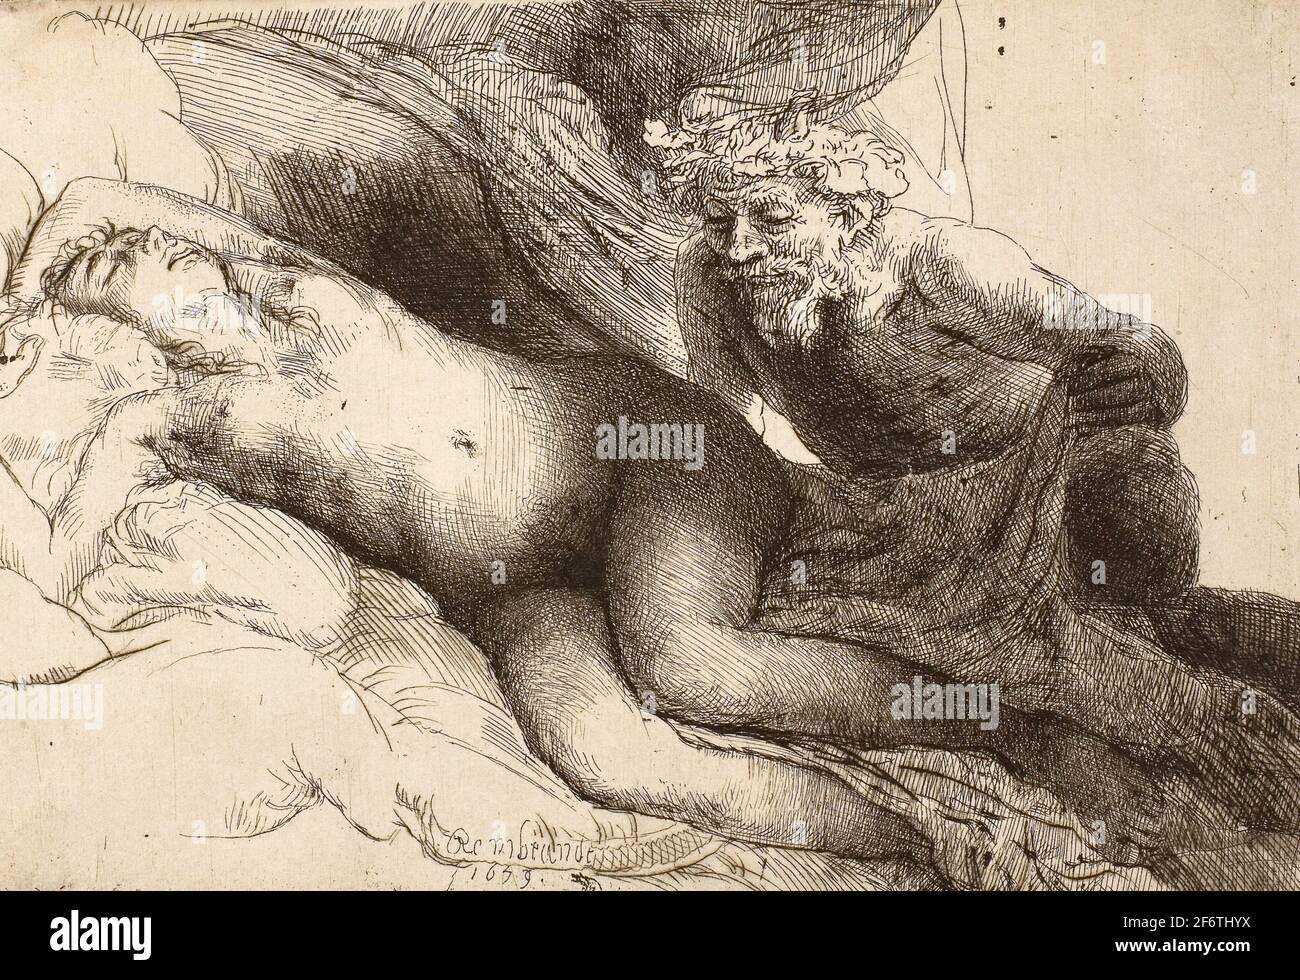 Author: Rembrandt Harmenszoon van Rijn. Jupiter and Antiope: The Larger Plate - 1659 - Rembrandt van Rijn Dutch, 1606-1669. Etching, drypoint, and Stock Photo